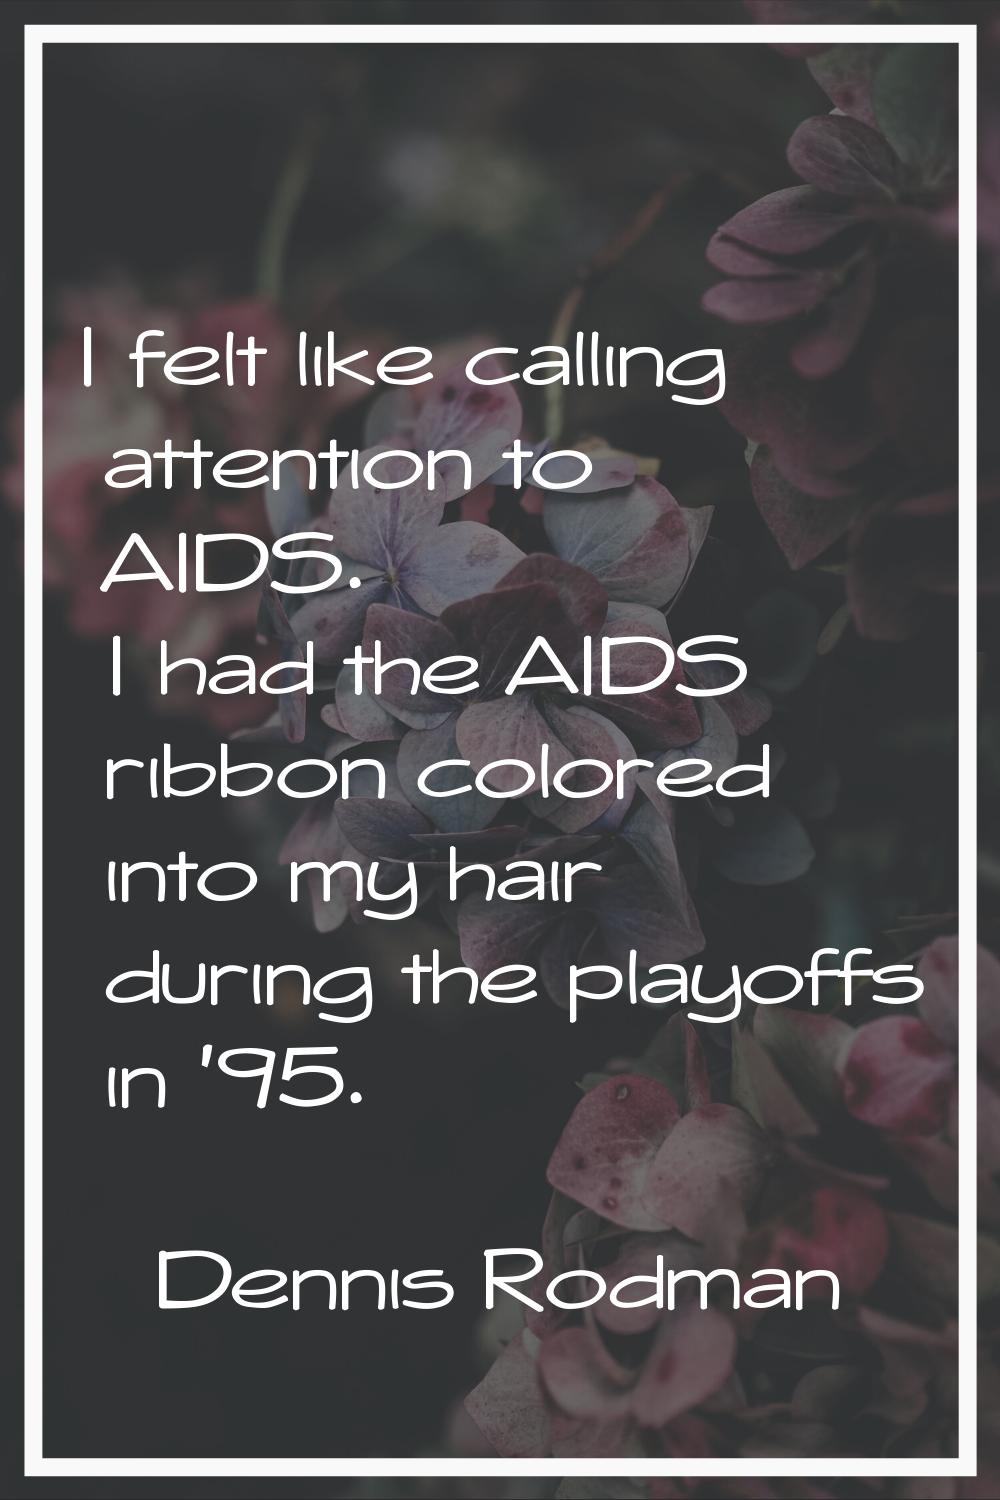 I felt like calling attention to AIDS. I had the AIDS ribbon colored into my hair during the playof